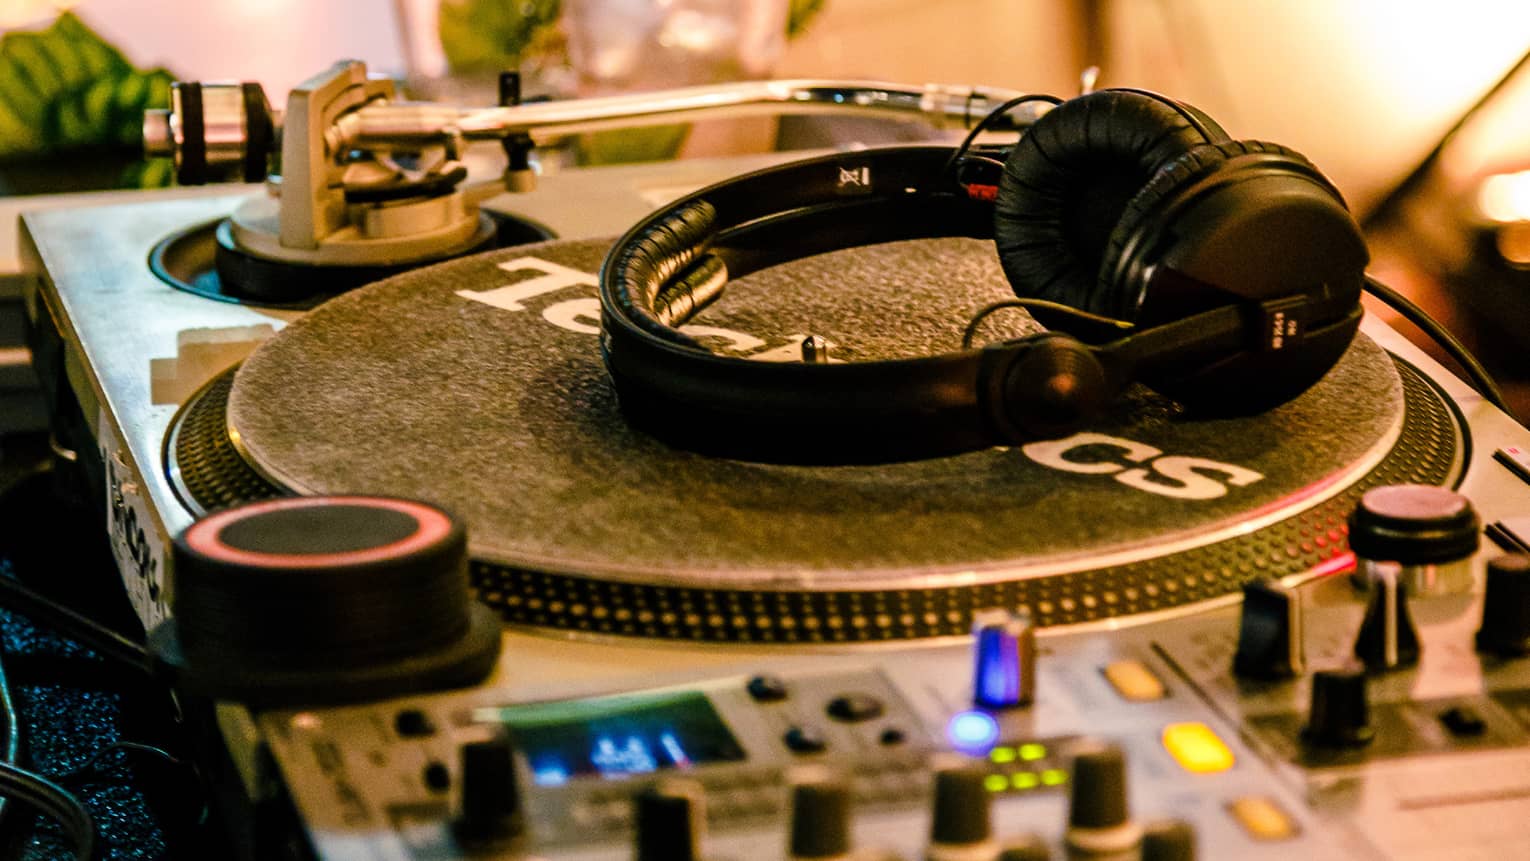 Headphones rest on turntable in DJ booth station